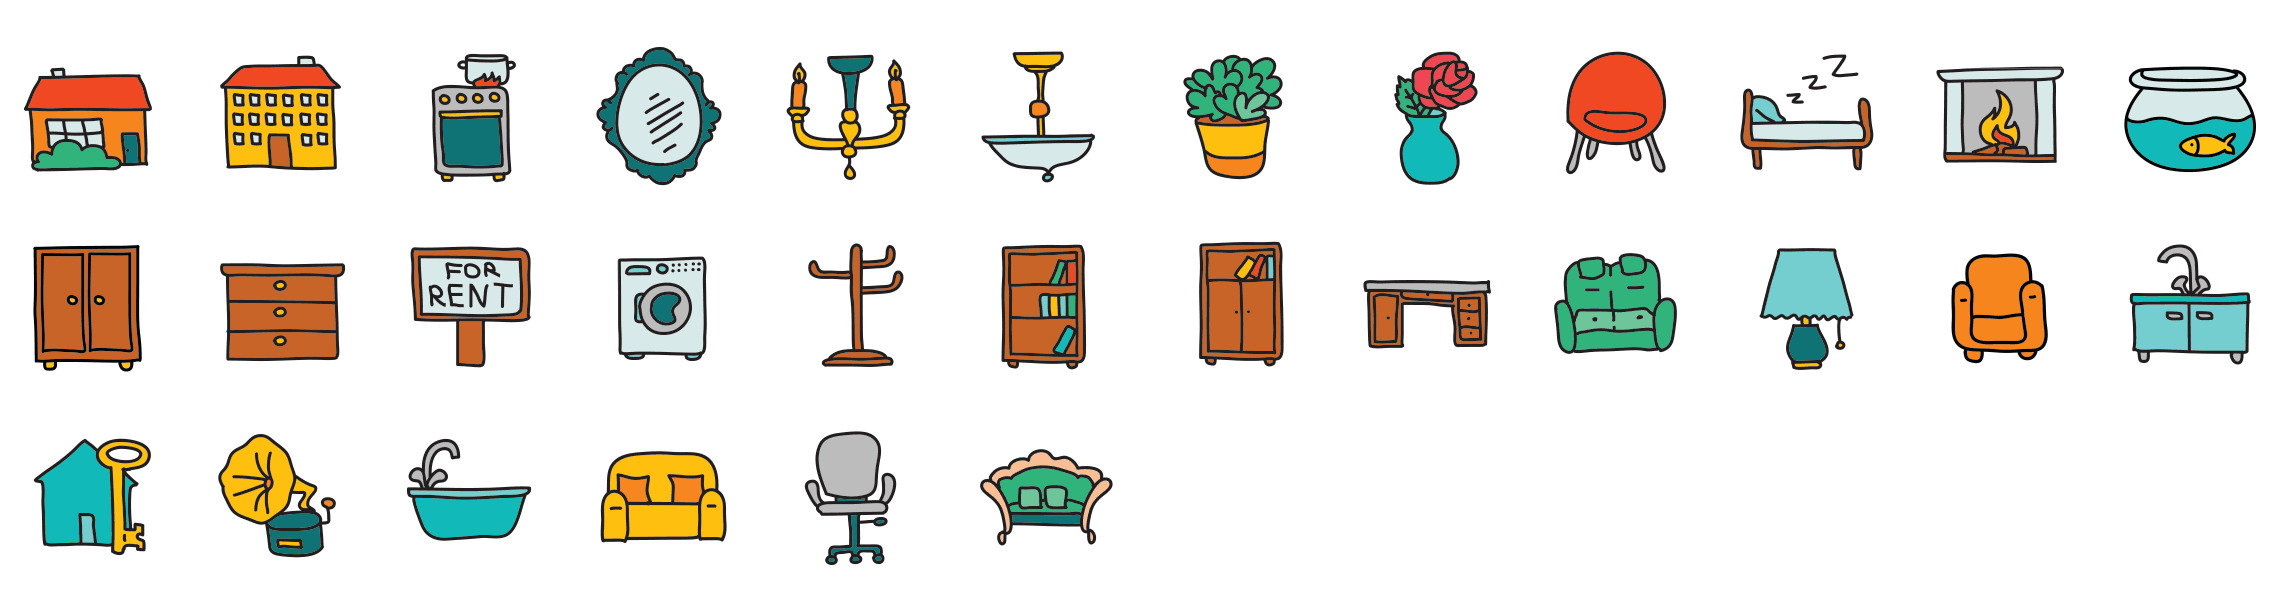 Furniture-doodle-icons